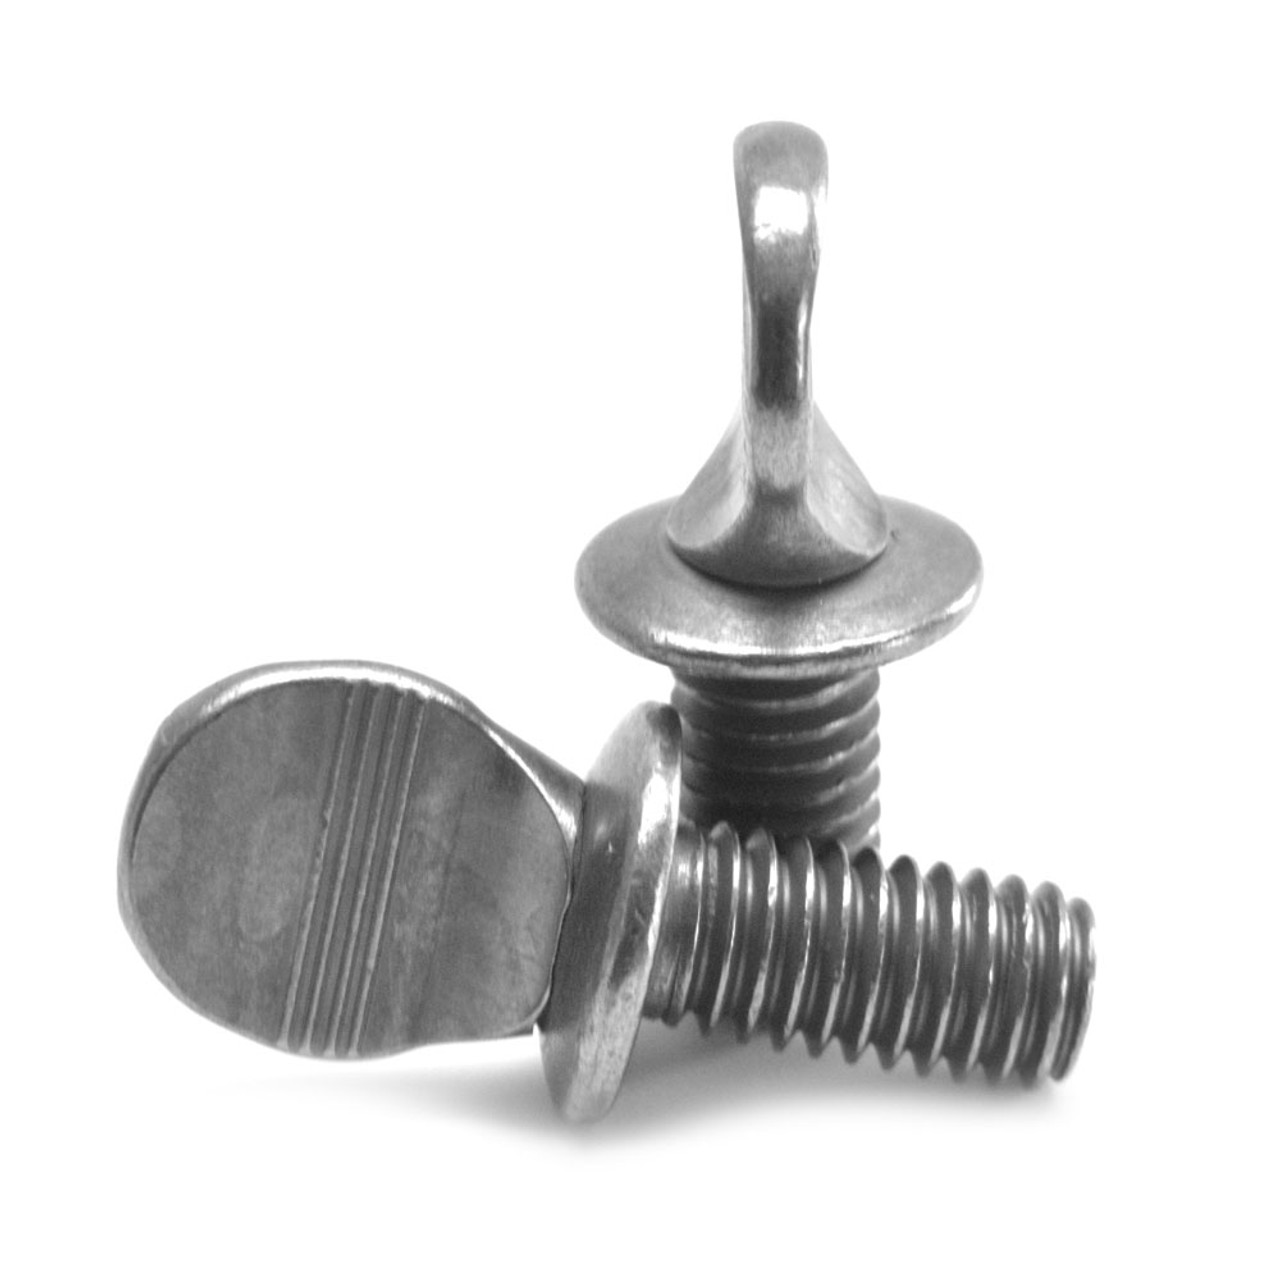 5/16-18 x 2 Coarse Thread Thumb Screw Type A With Shoulder Low Carbon Steel Plain Finish